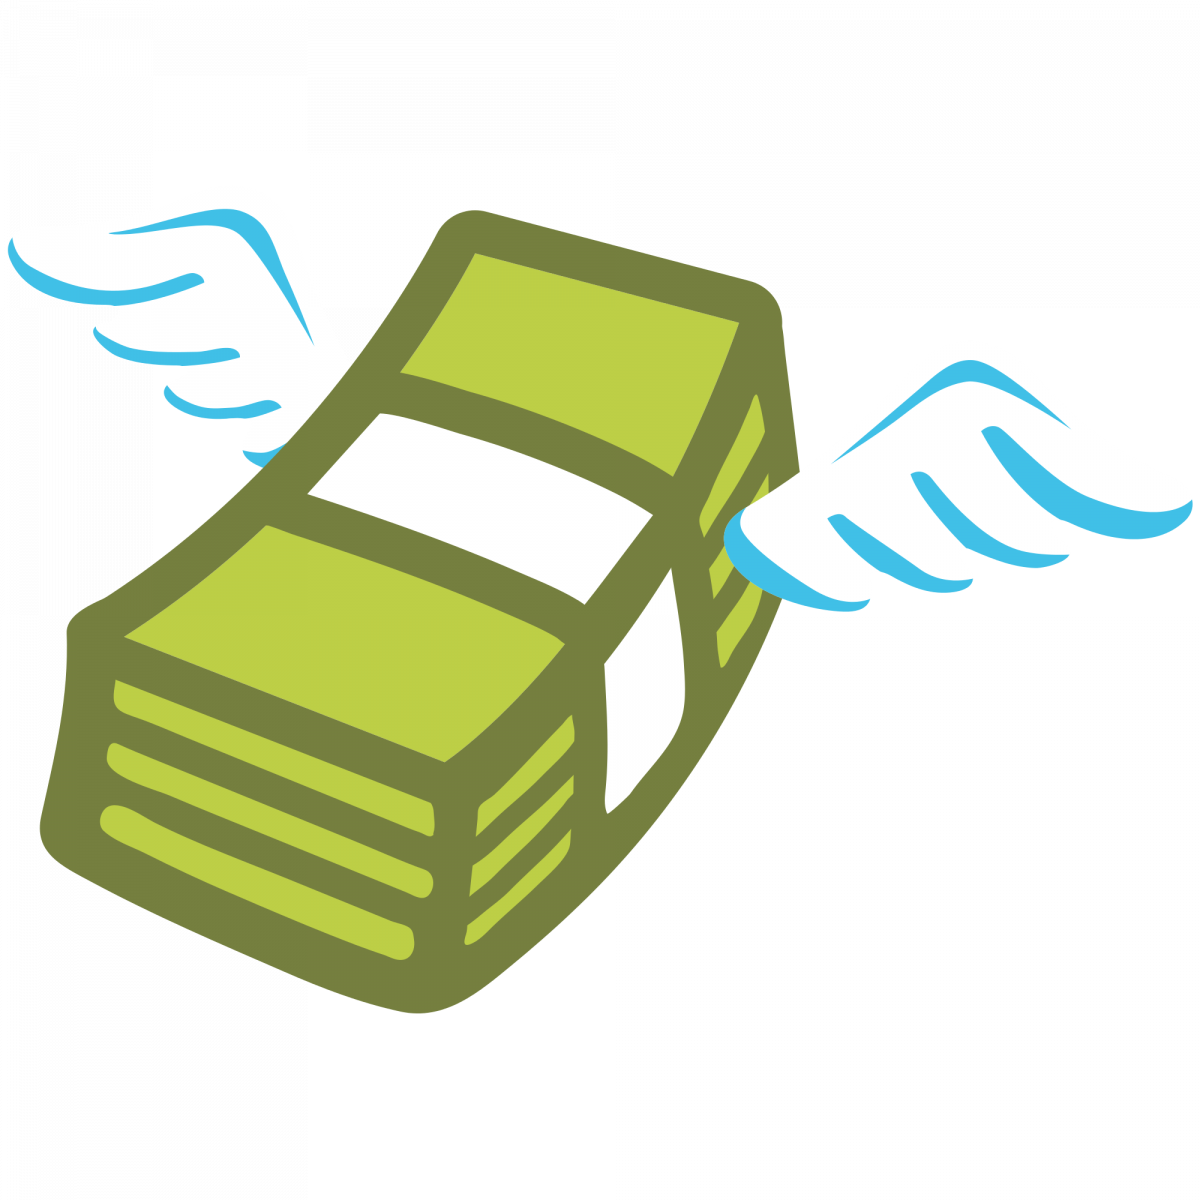 Money Dollar Sign Currency Android Emoji PNG Image